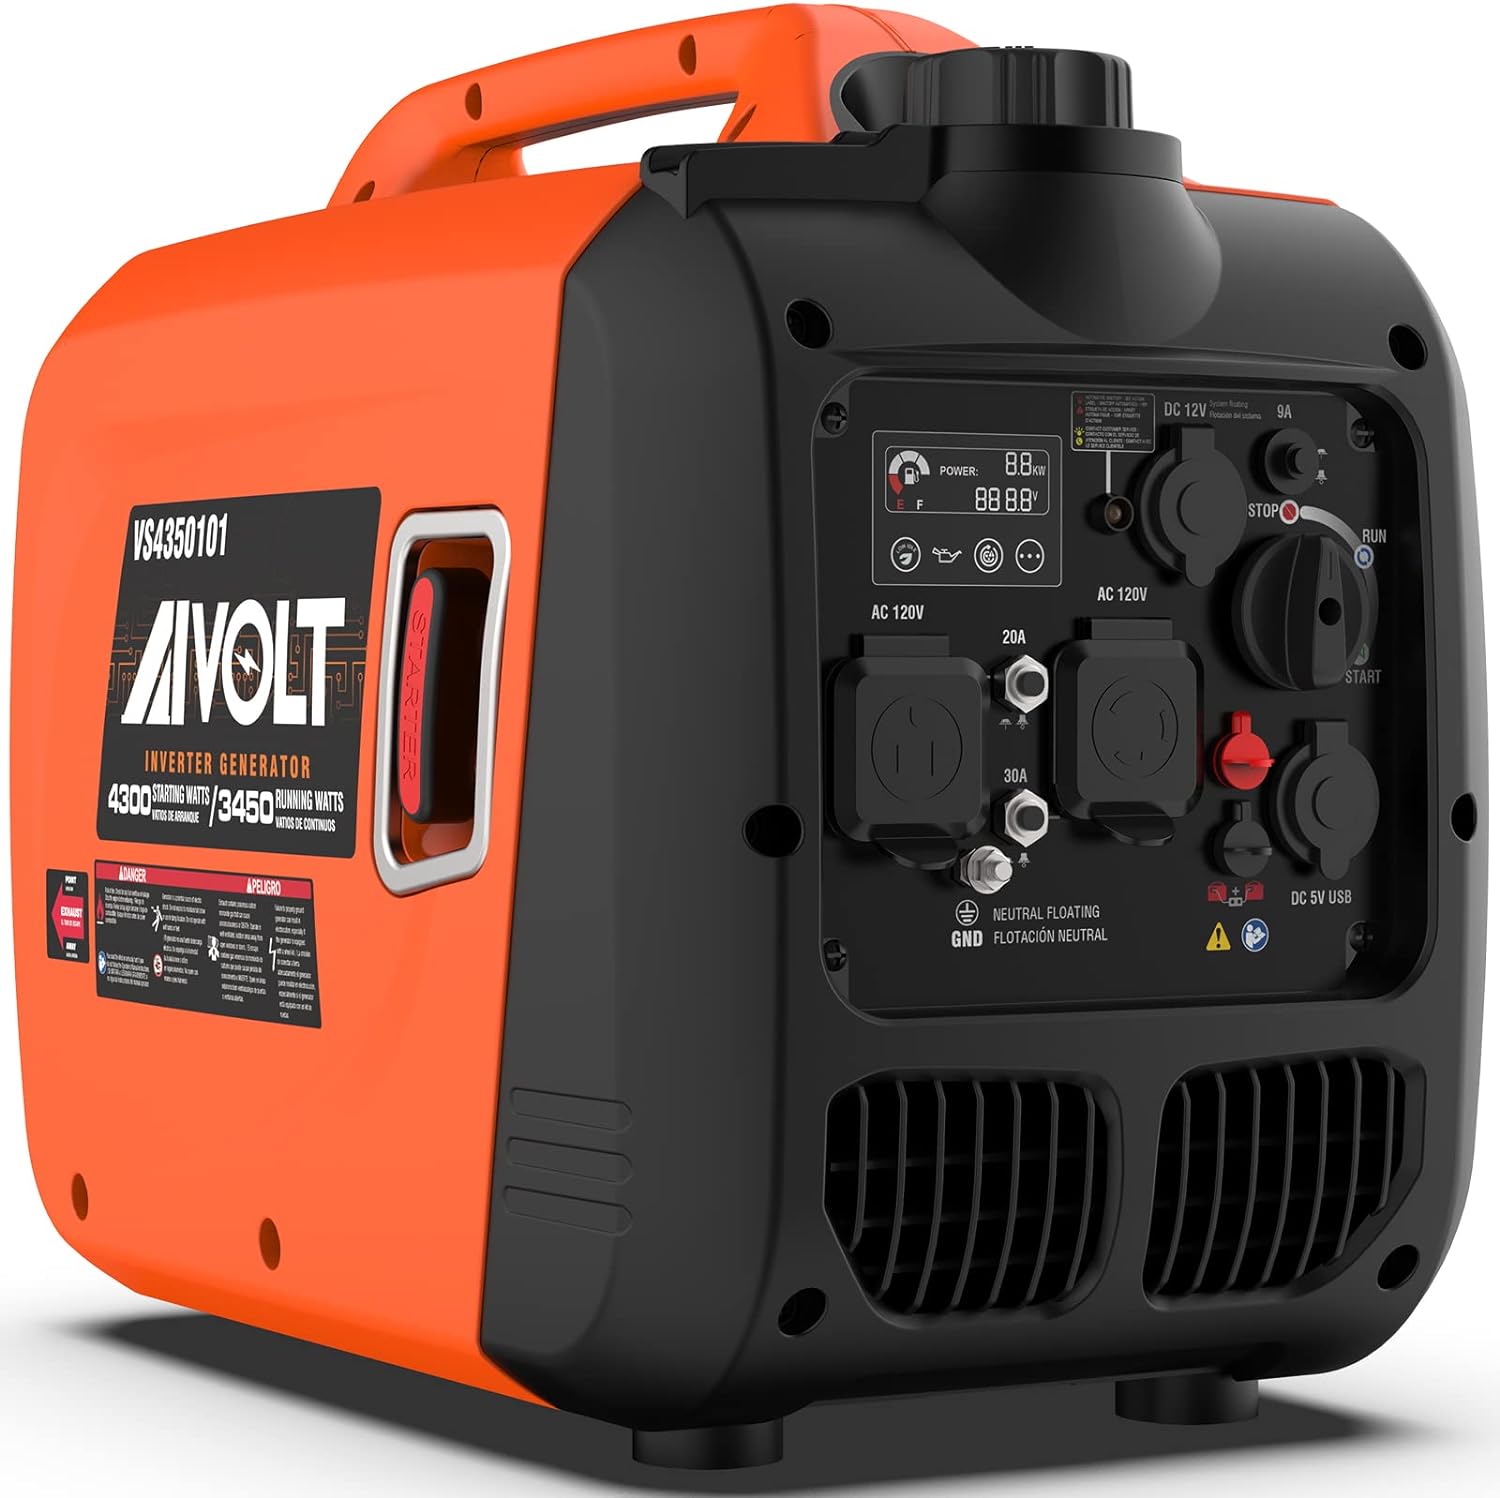 AIVOLT 8000 Watts Dual Fuel Portable Inverter Generator Super Quiet Gas Propane Powered Electric Start Outdoor Generator for Home Back Up Travel RV Camping, 50 State Approved - AIVOLT 8000 Watts Dual Fuel Portable Inverter Generator Review